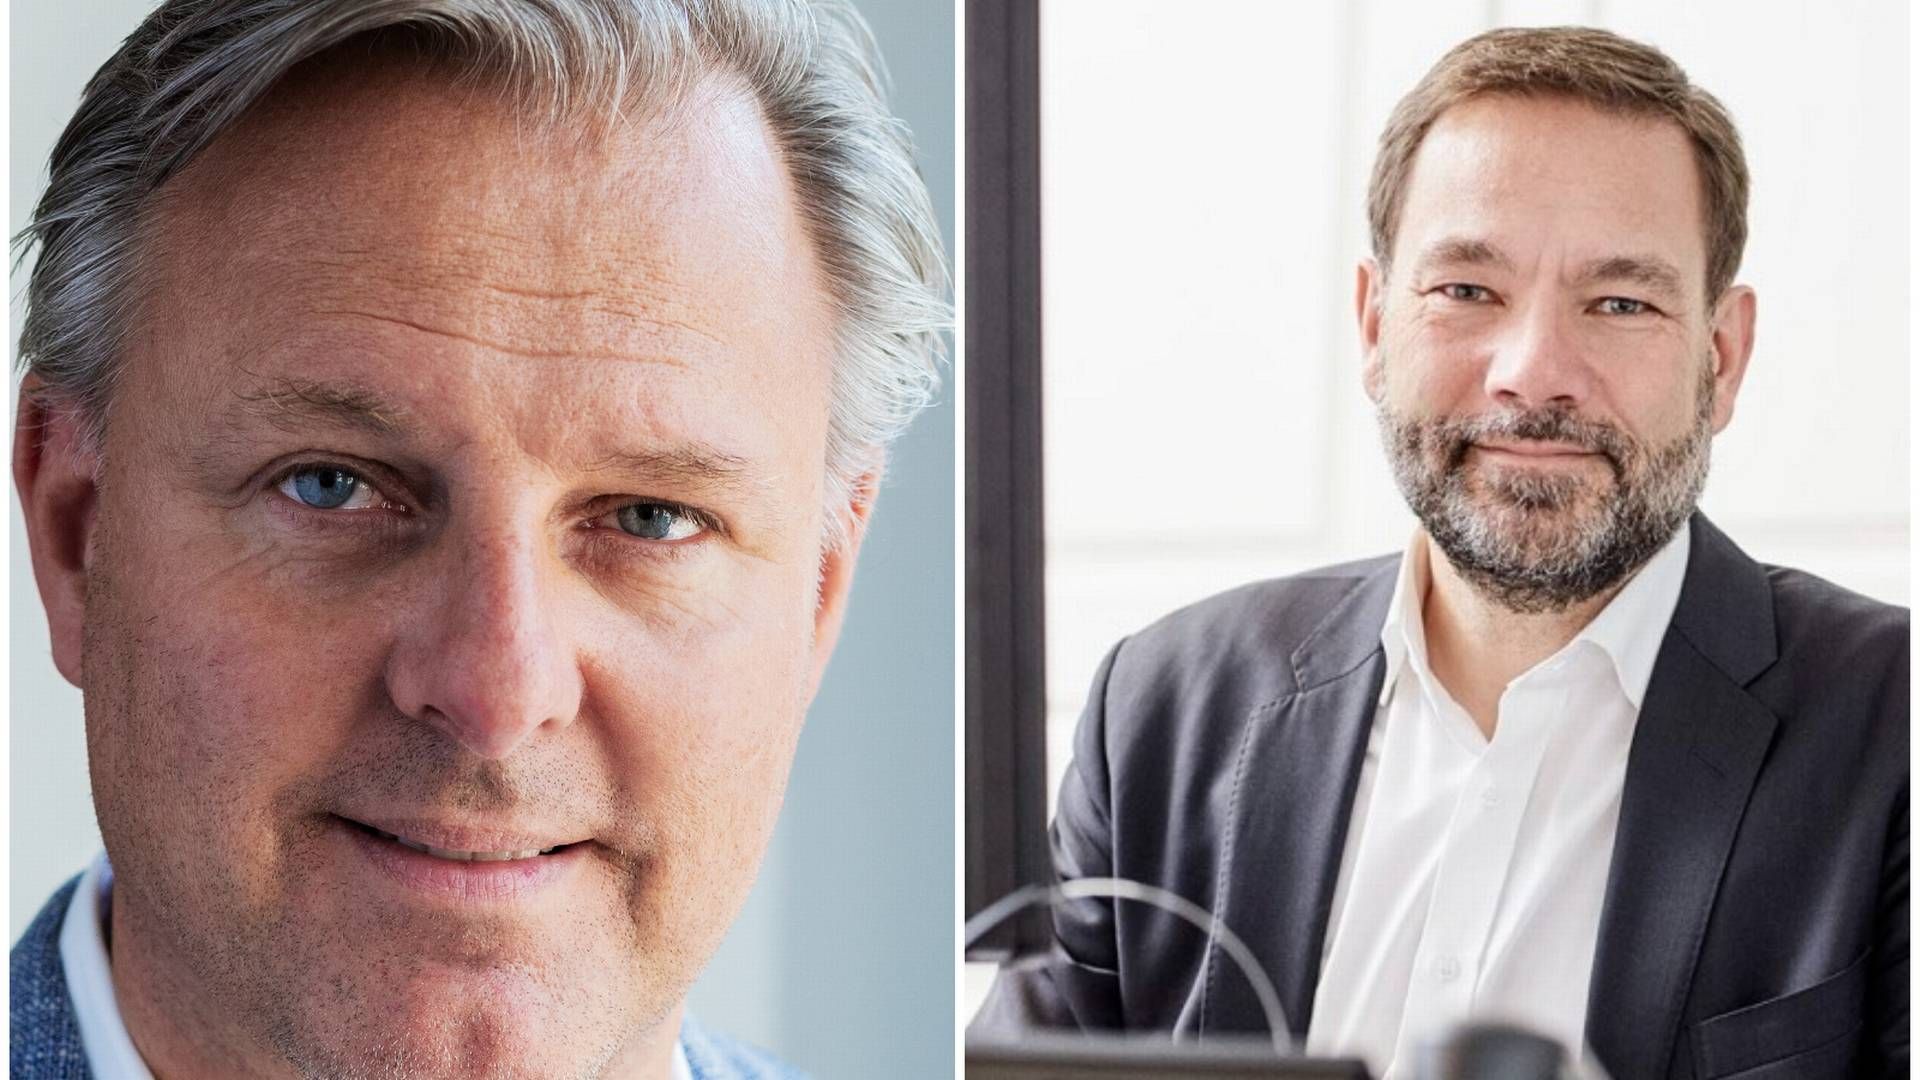 Kim Mikkelsen (left) sees positive prospects in Jan Johan Kühl and Polaris' decision to enter the market for listed companies. | Photo: Strategic Investments/Polaris